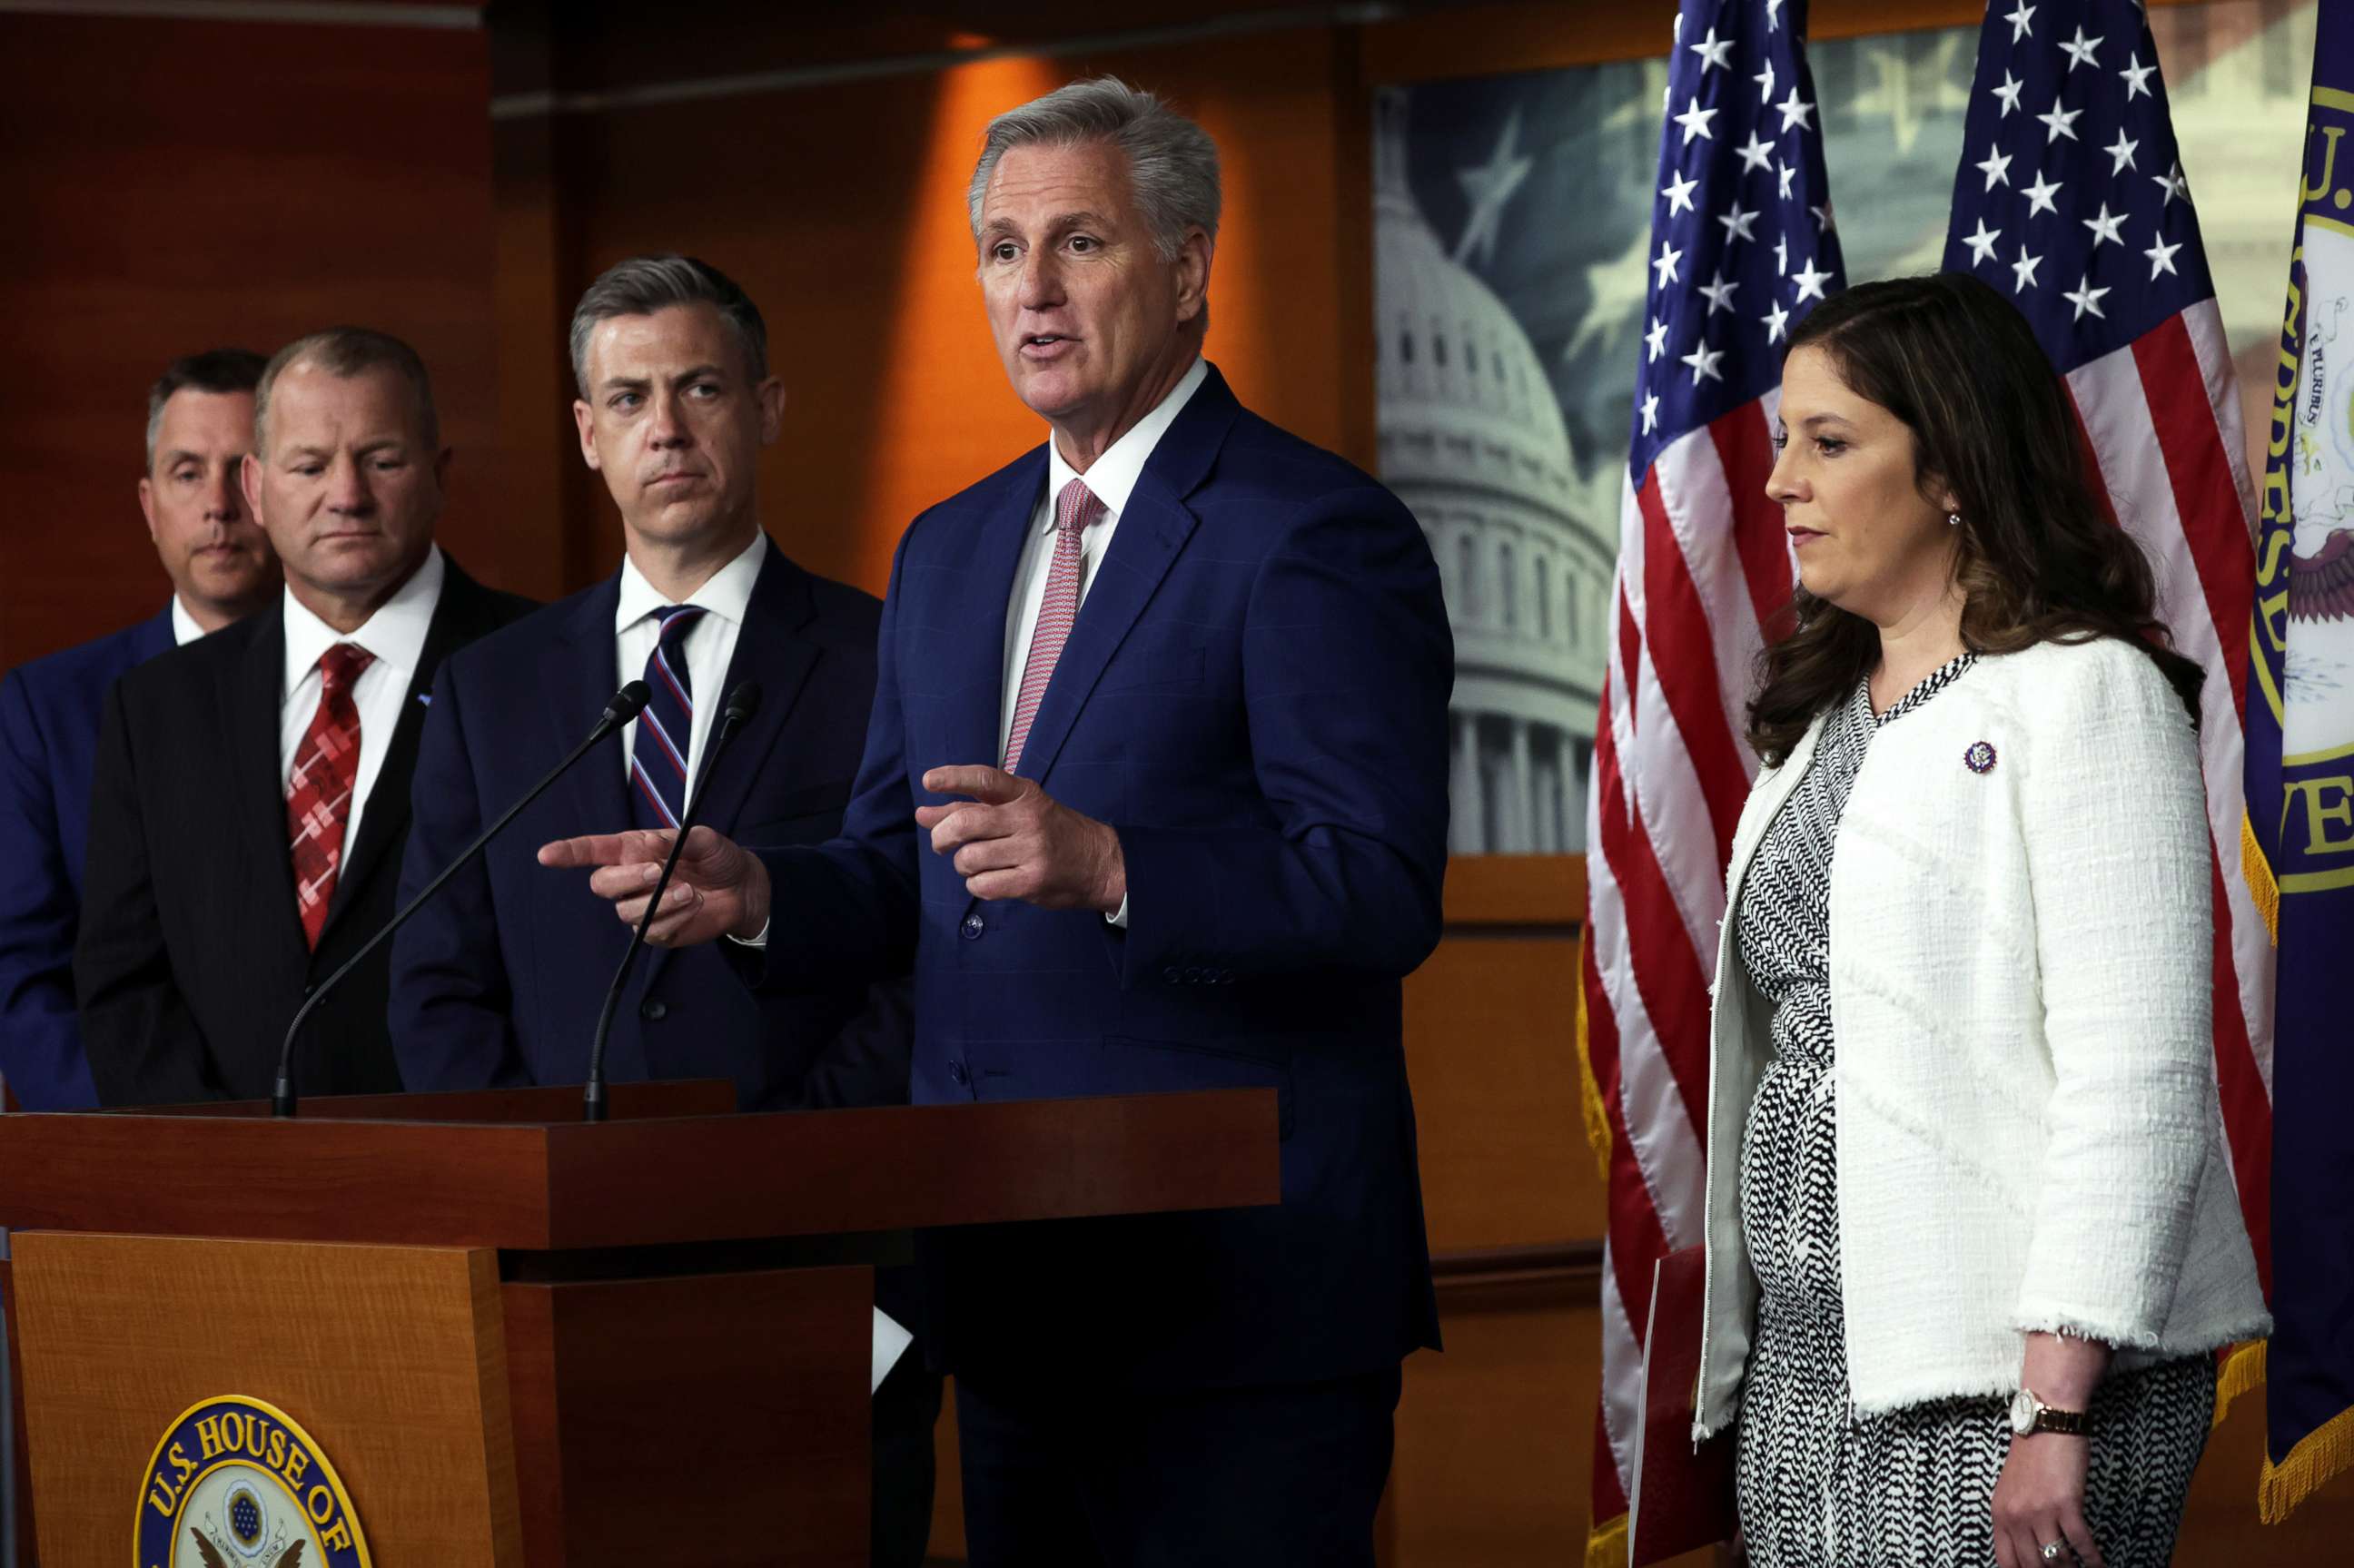 PHOTO: House Minority Leader Rep. Kevin McCarthy speaks as Rep. Kelly Armstrong, Rep. Troy Nehls, Rep. Jim Banks, and House Republican Conference Chair Rep. Elise Stefanik listen during a news conference at the Capitol, June 9, 2022.